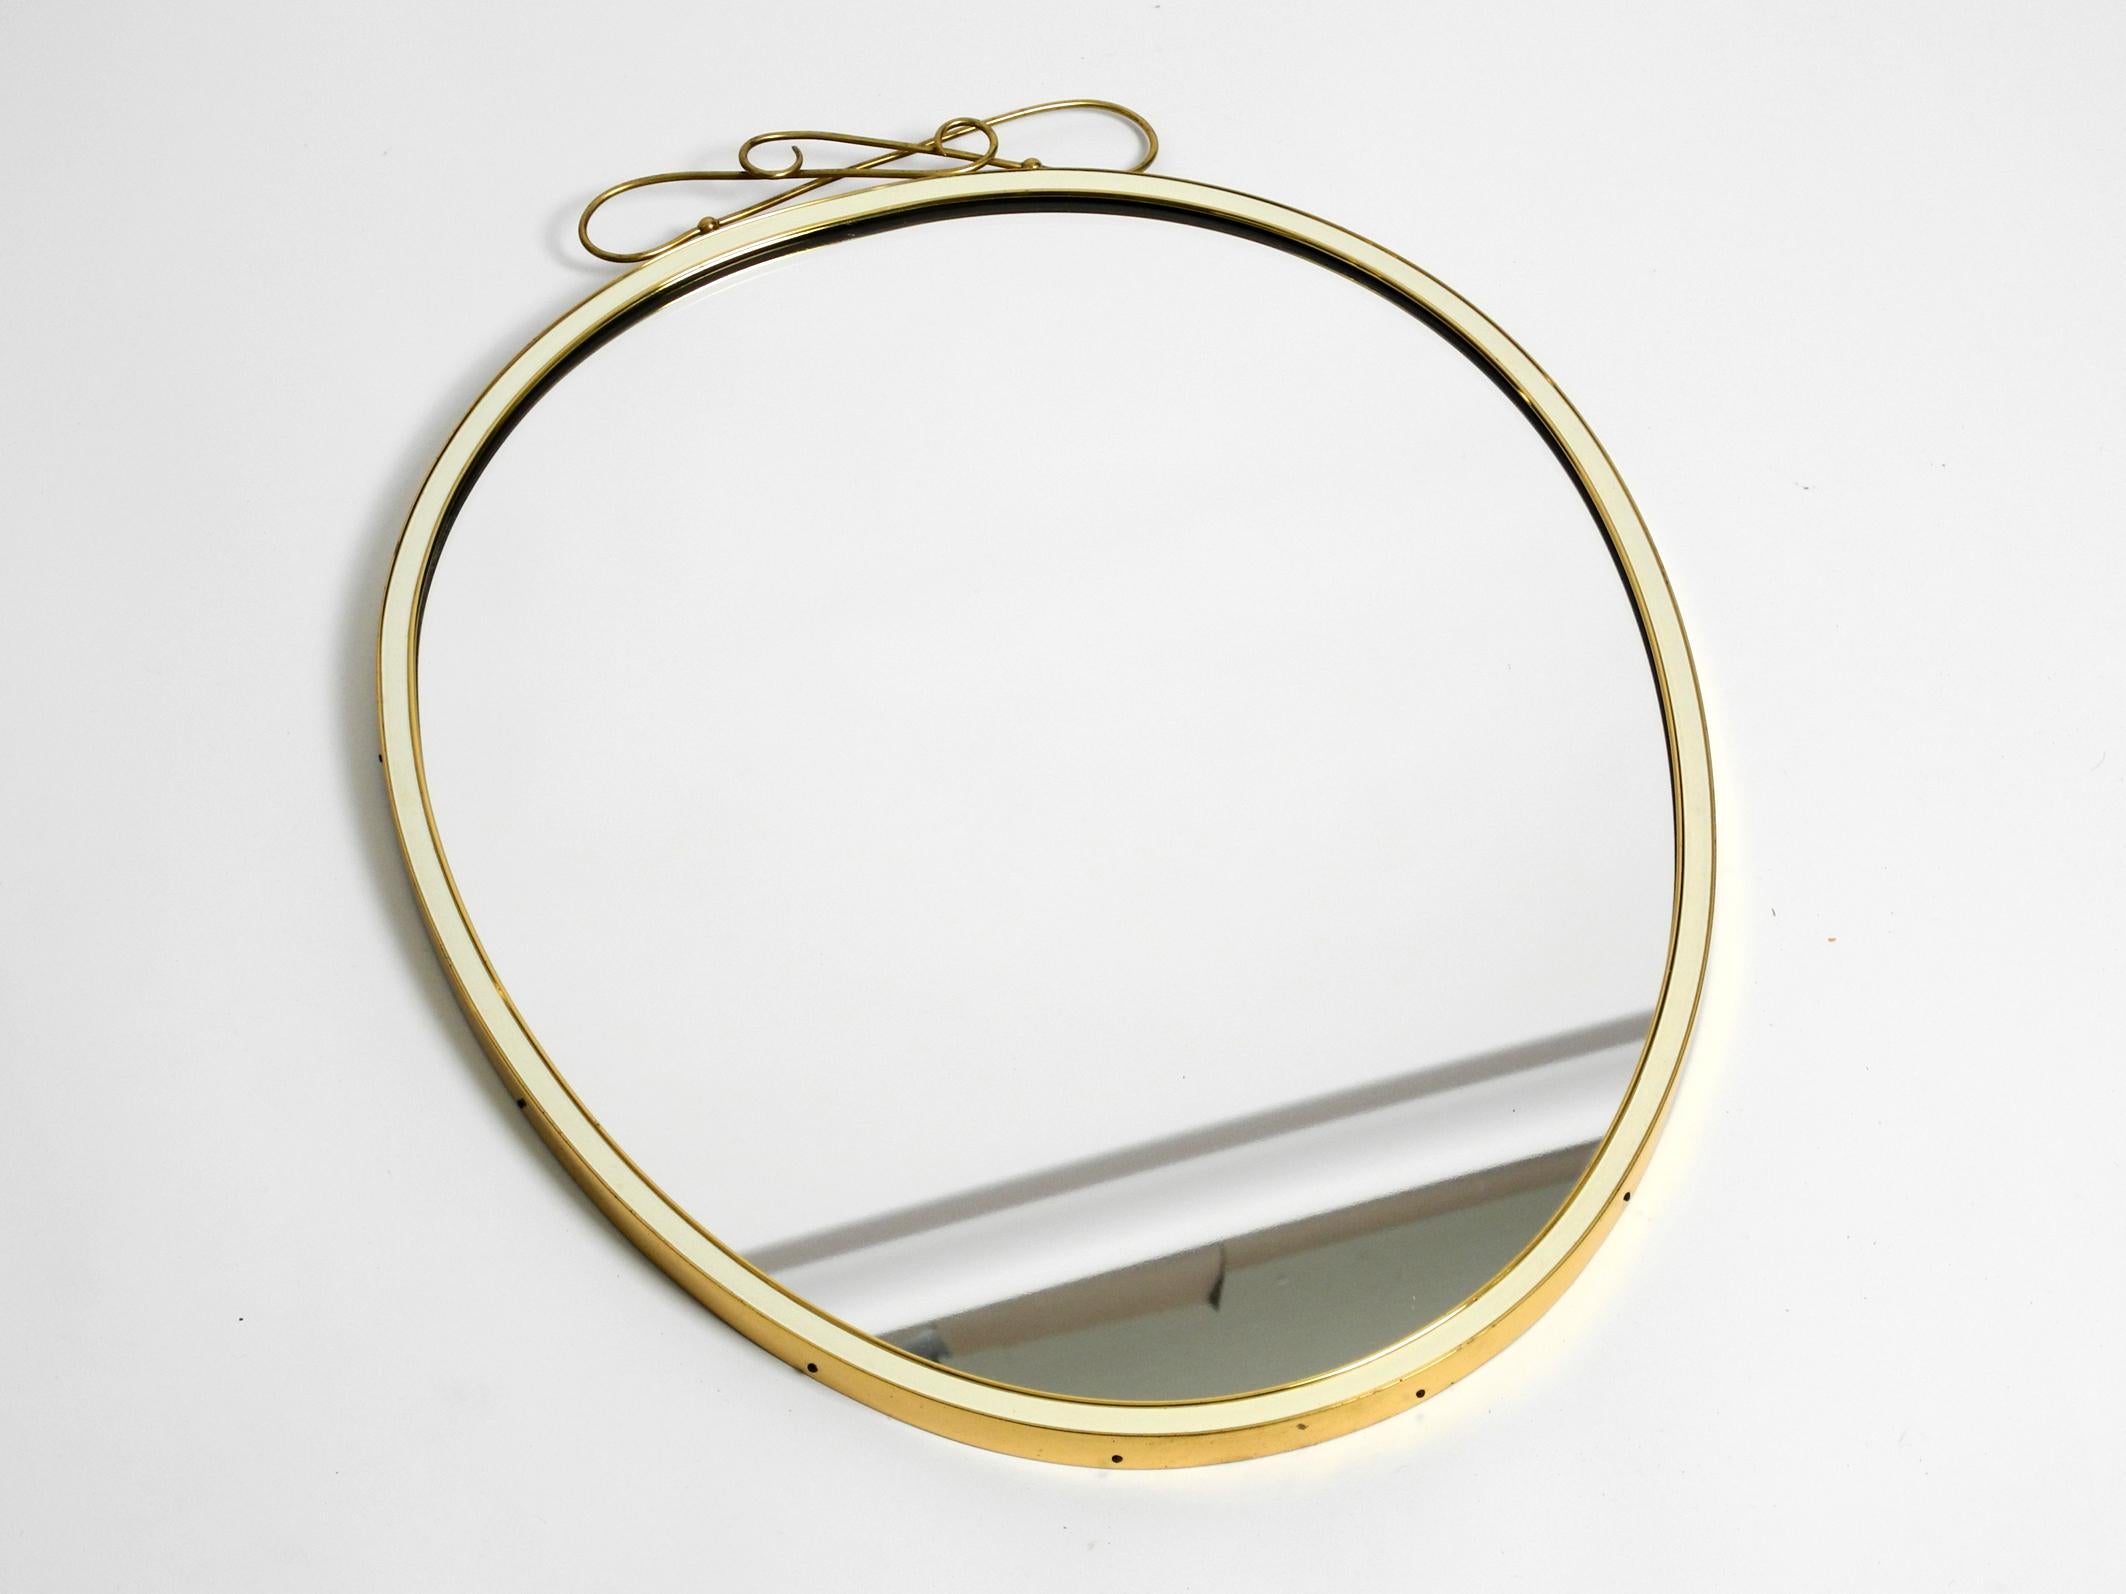 Original beautiful Mid-Century Modern brass wall mirror. Manufactured by Münchener Zierspiegel. Made in Germany. With original label on the back.
Great 1950s minimalist design.
Very high-quality, heavy workmanship with a solid thick brass frame